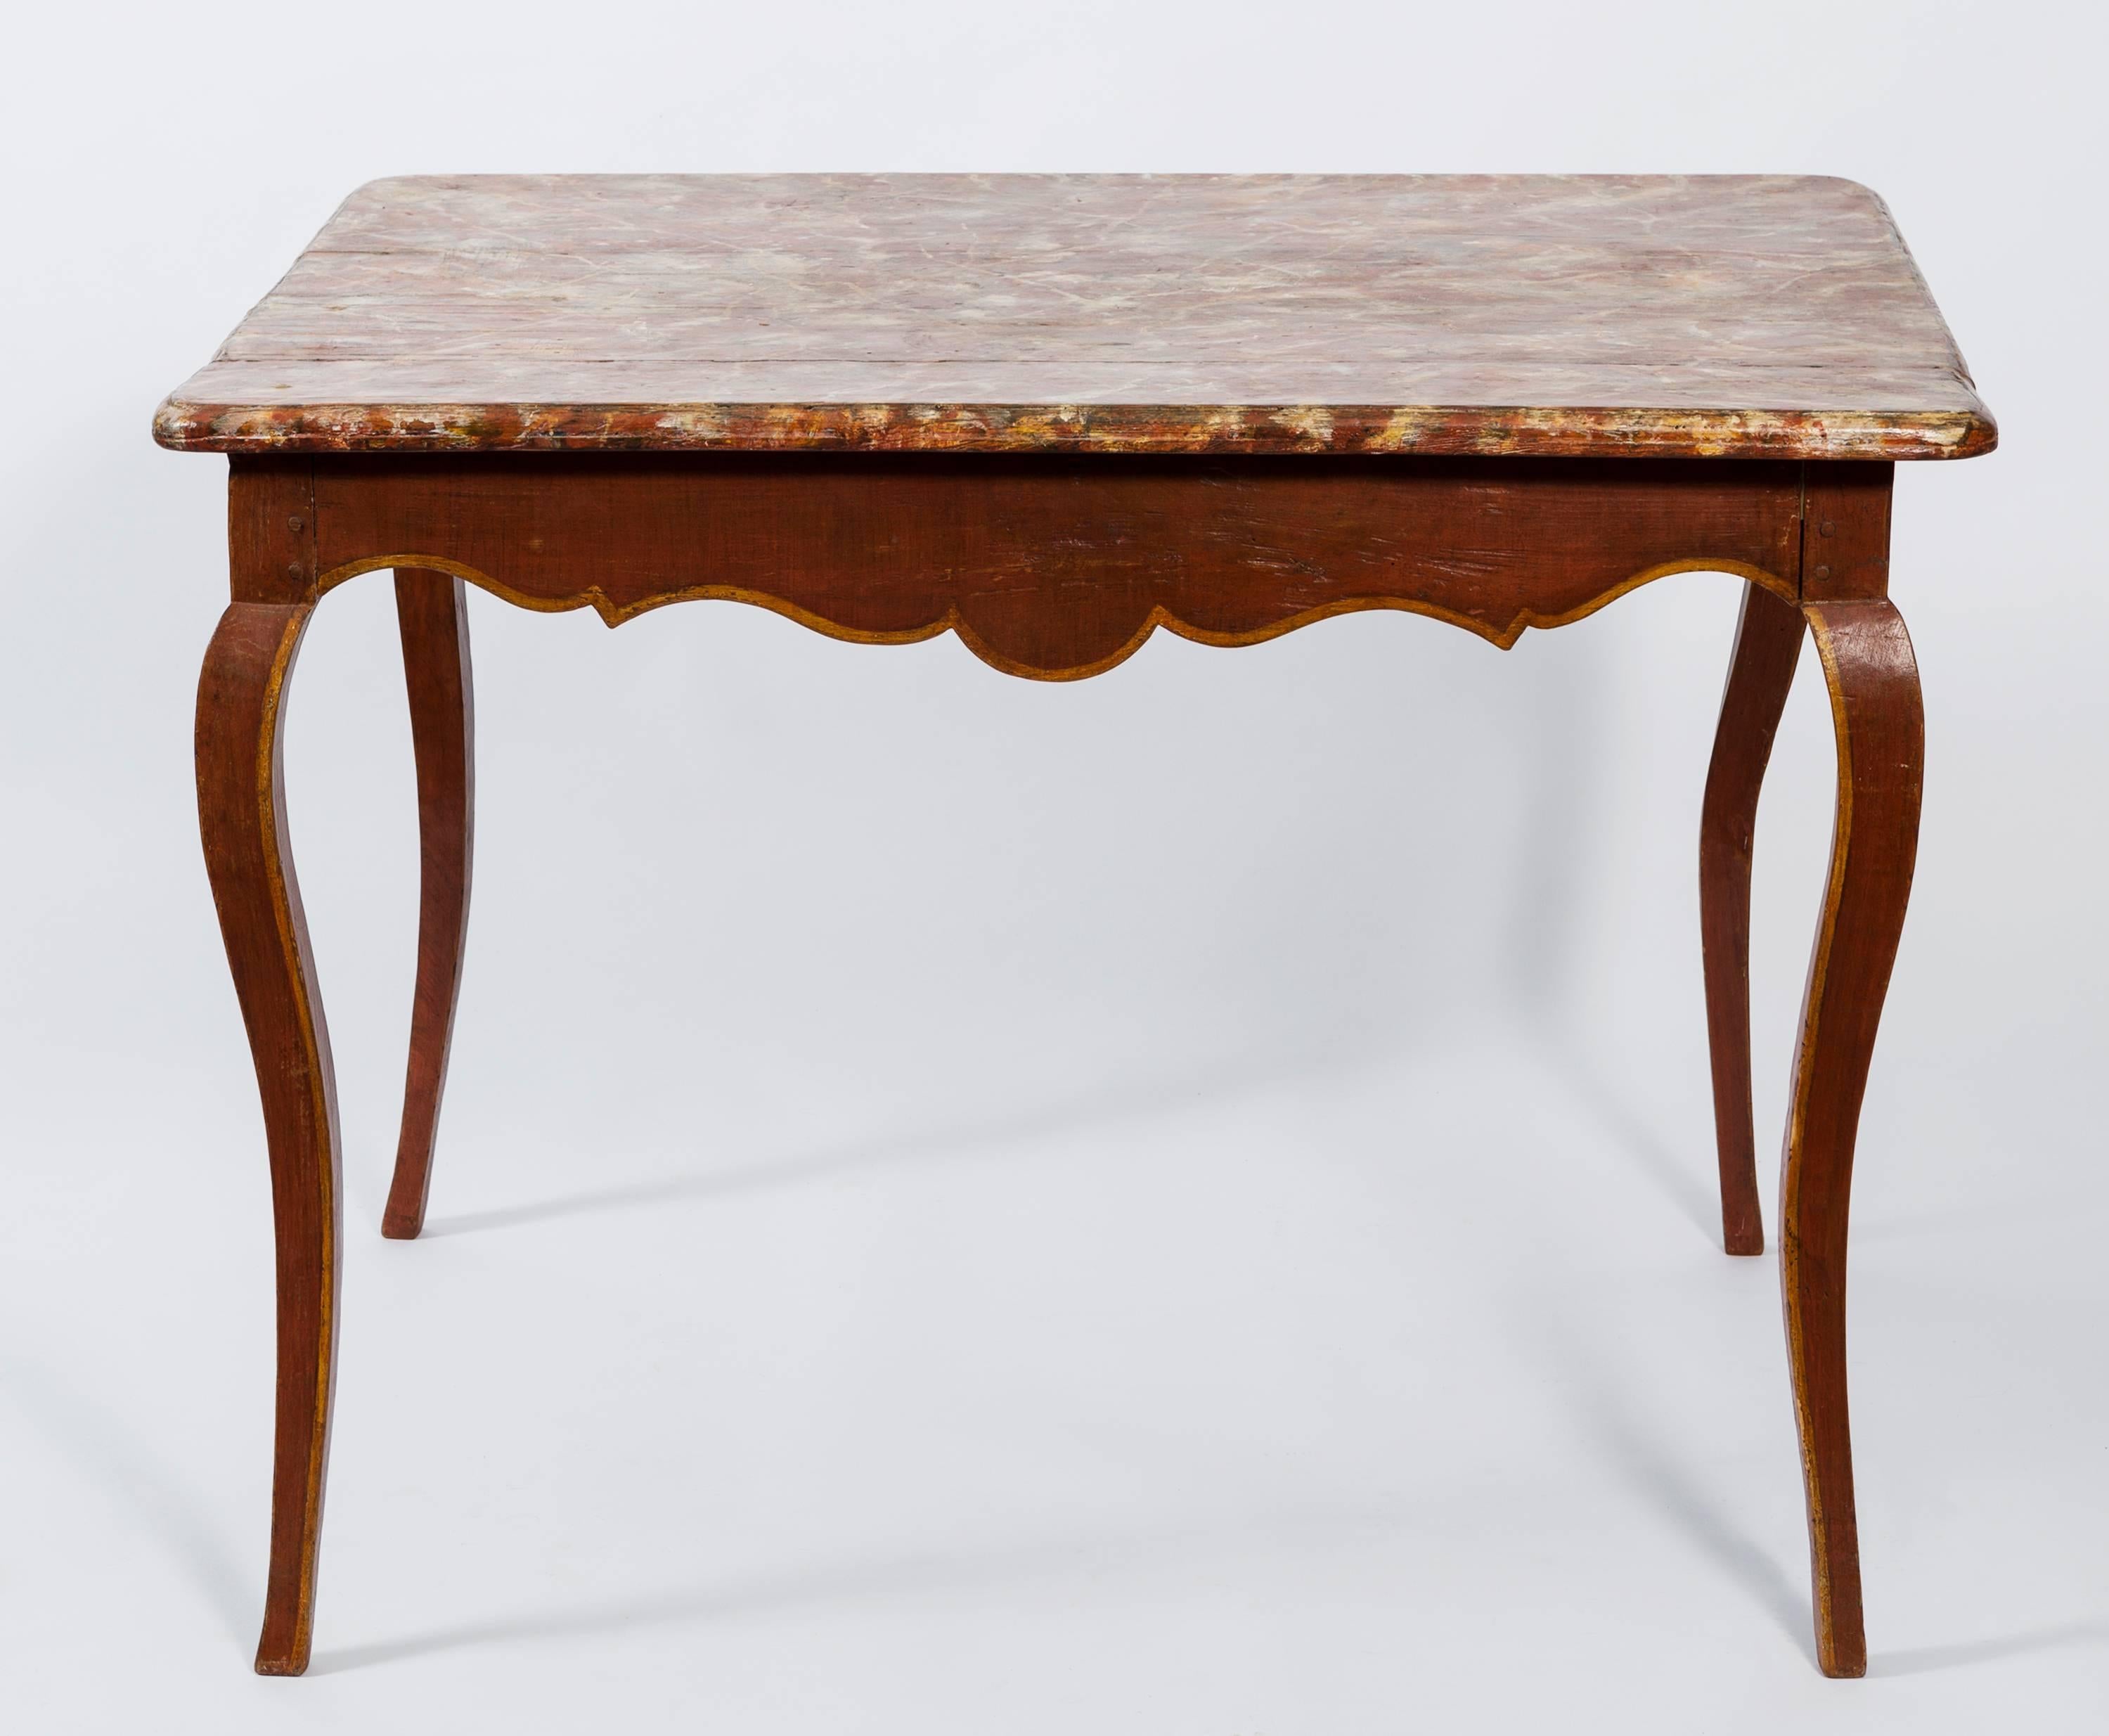 19th Century French Painted Wood Table with Faux Marble Top For Sale 7